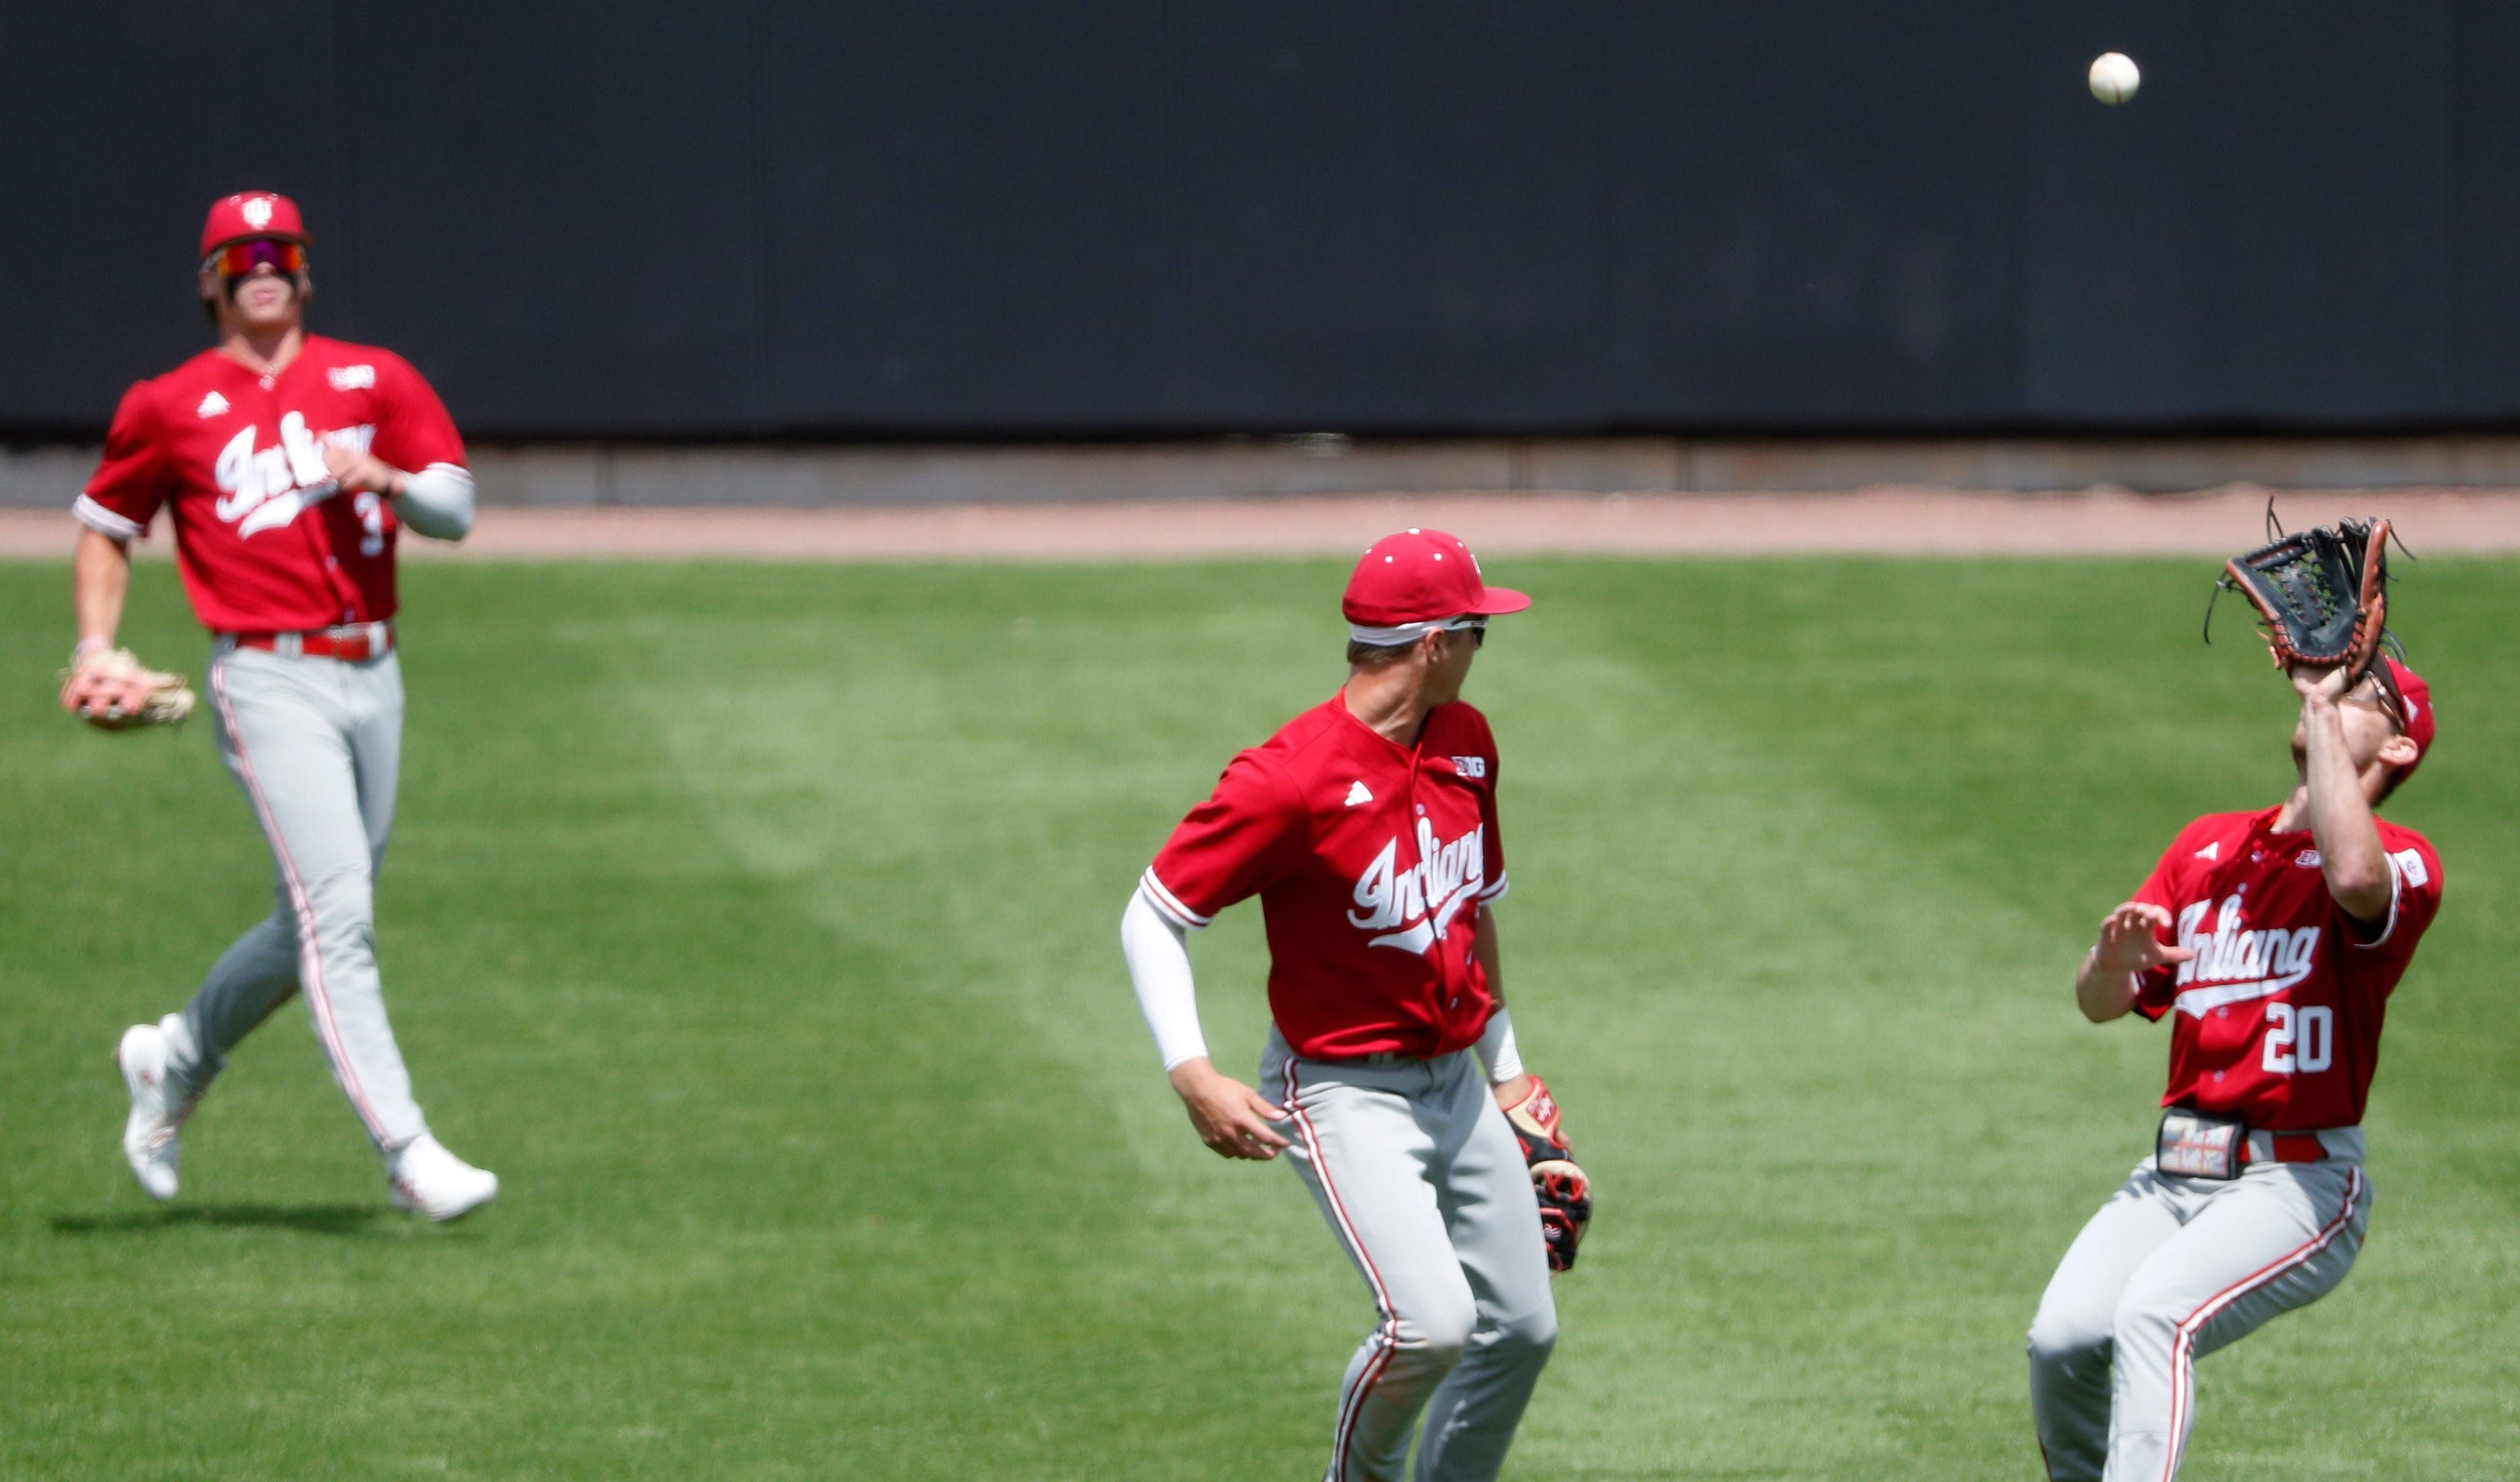 Indiana, shown here snagging a short fly, looks headed for the NCAA Tournament.